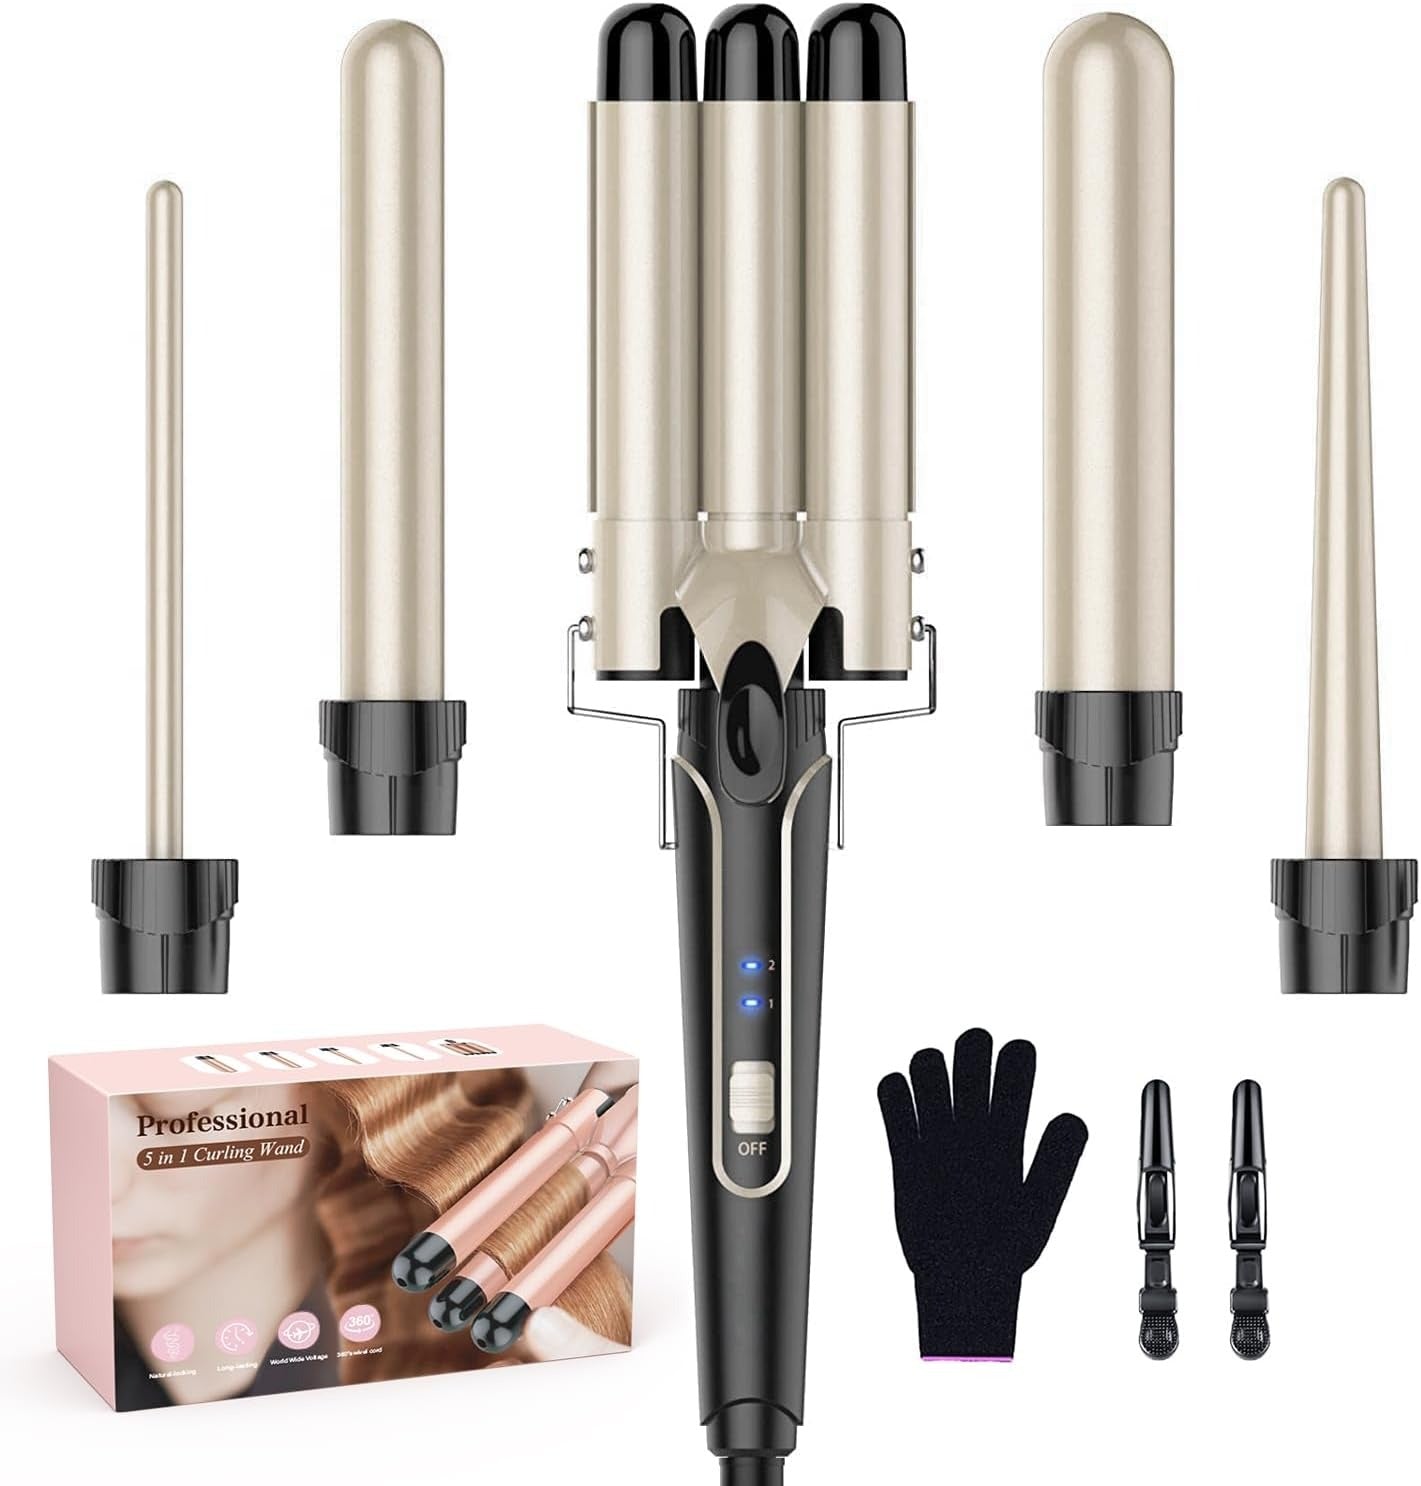 5 in 1 hair curler set with 3 barrel hair curler for women, fast heating hair curler for all hair types